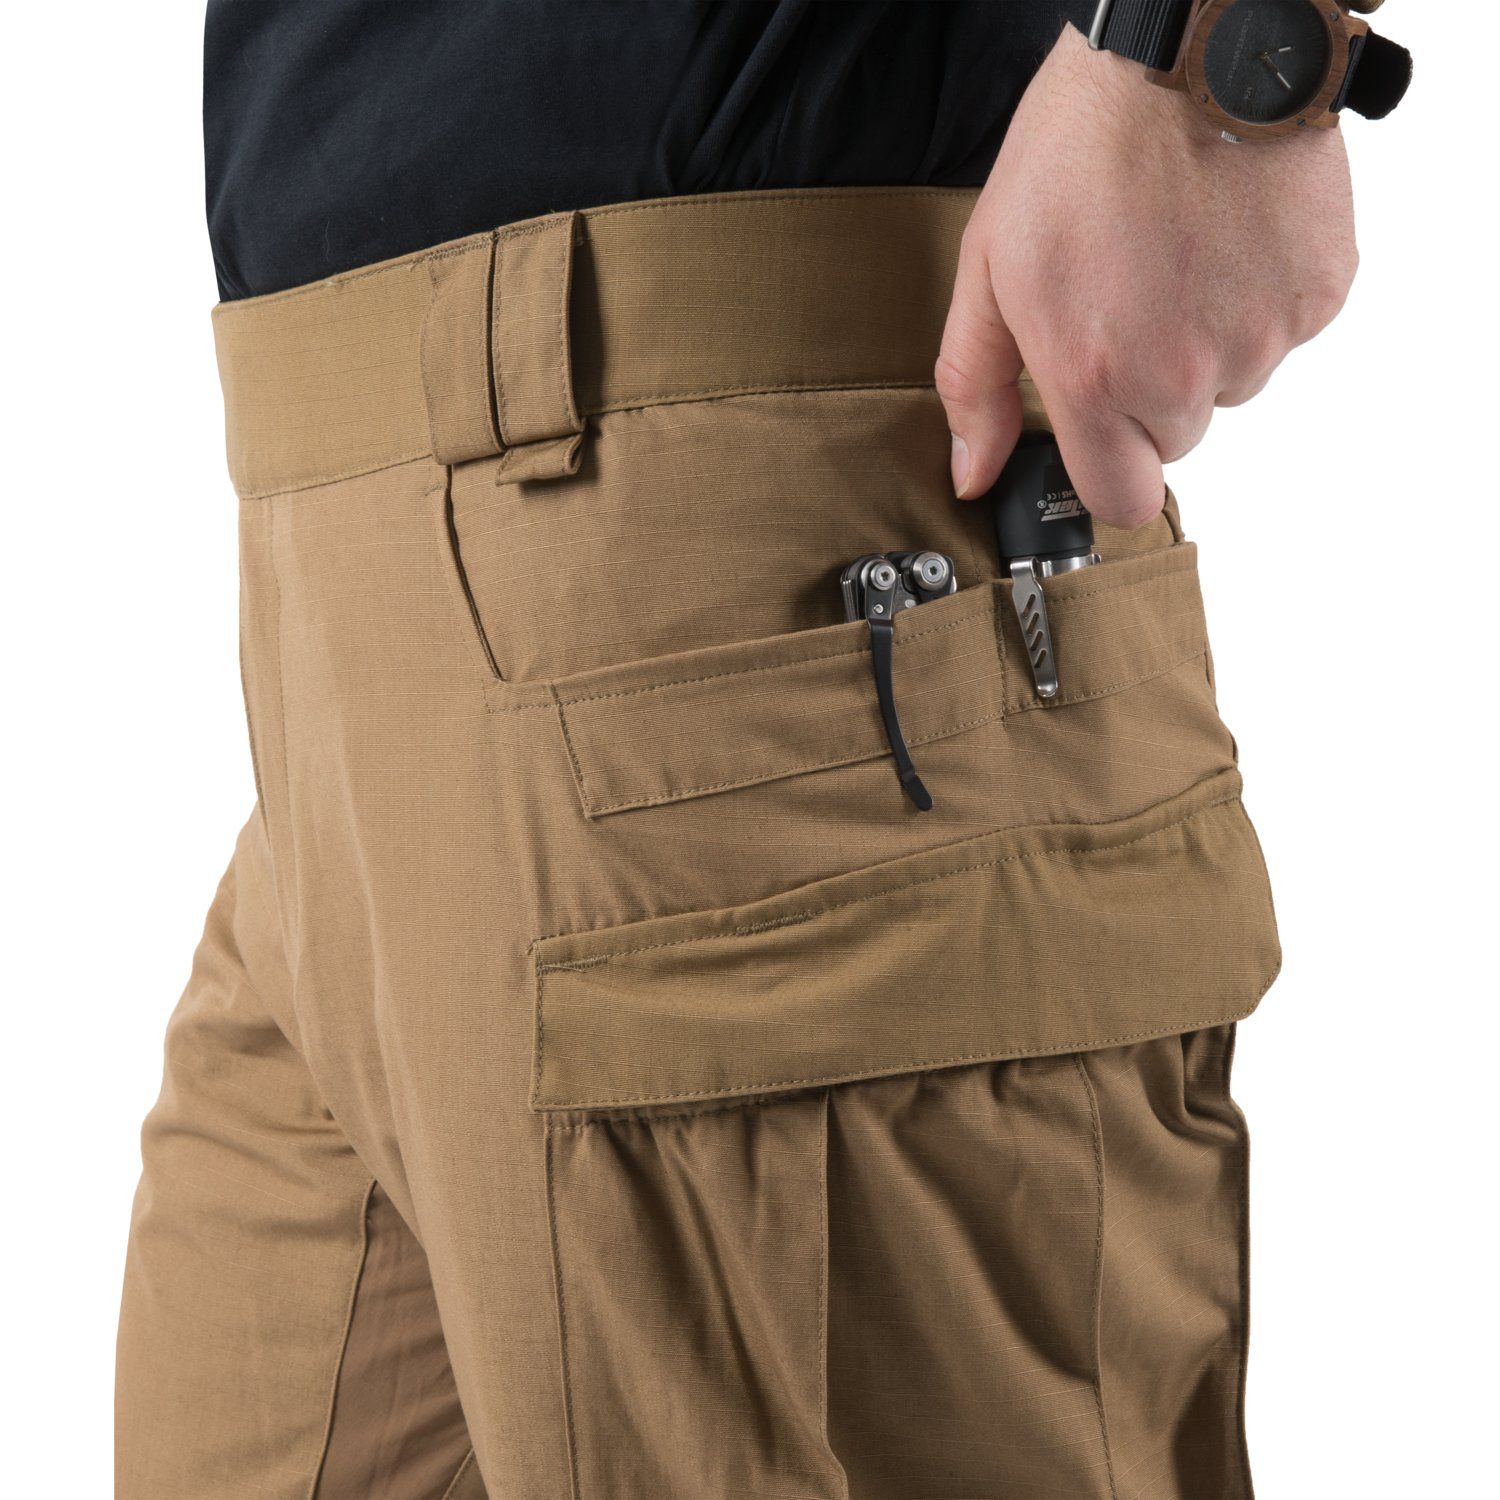 MBDU® Trousers - Nyco Ripstop - Multicam® Black - Helikon